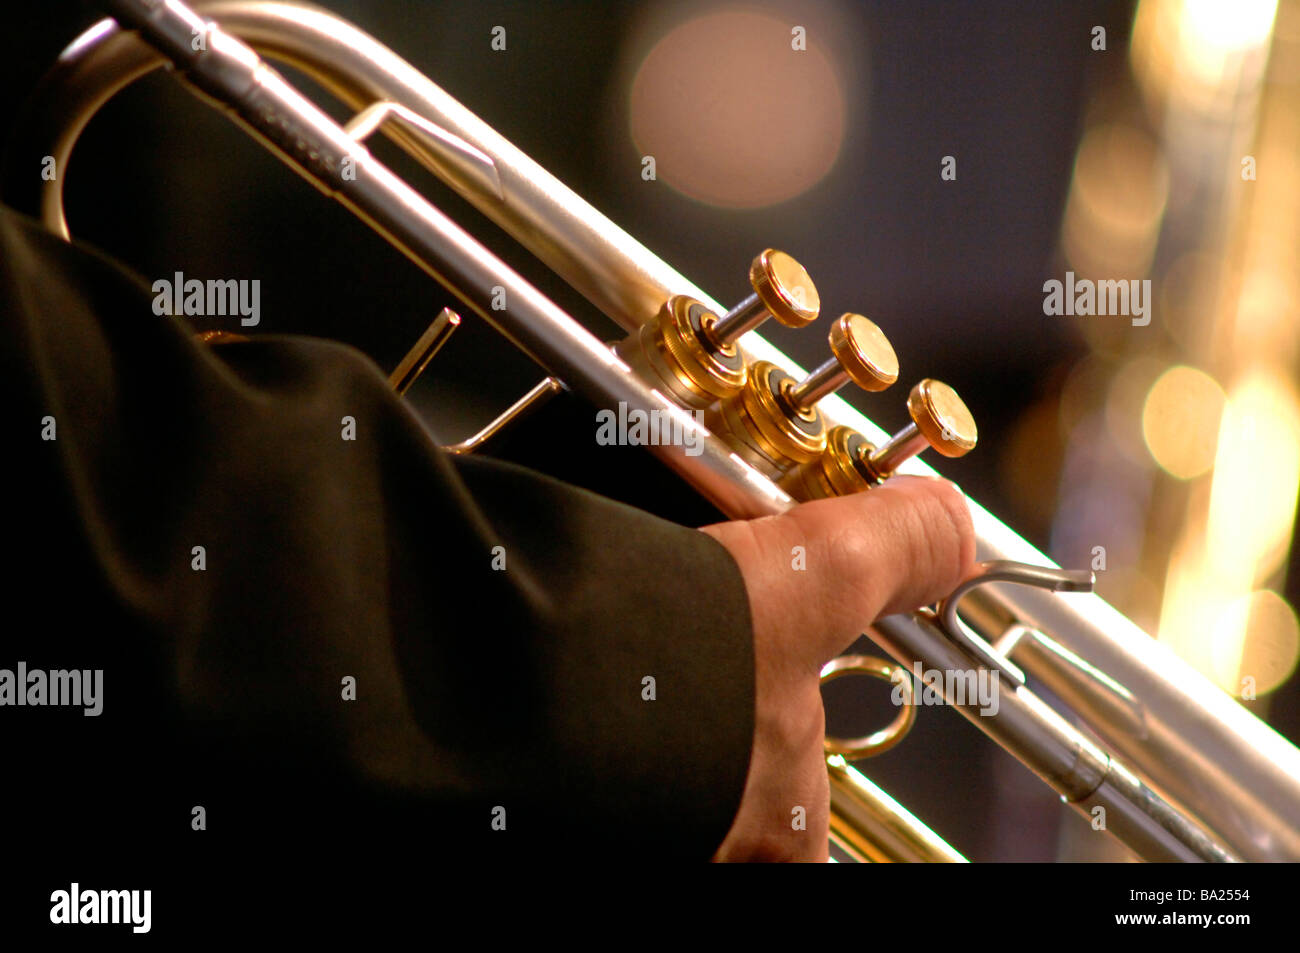 Musical instruments, trumpet at an on stage performance Stock Photo - Alamy